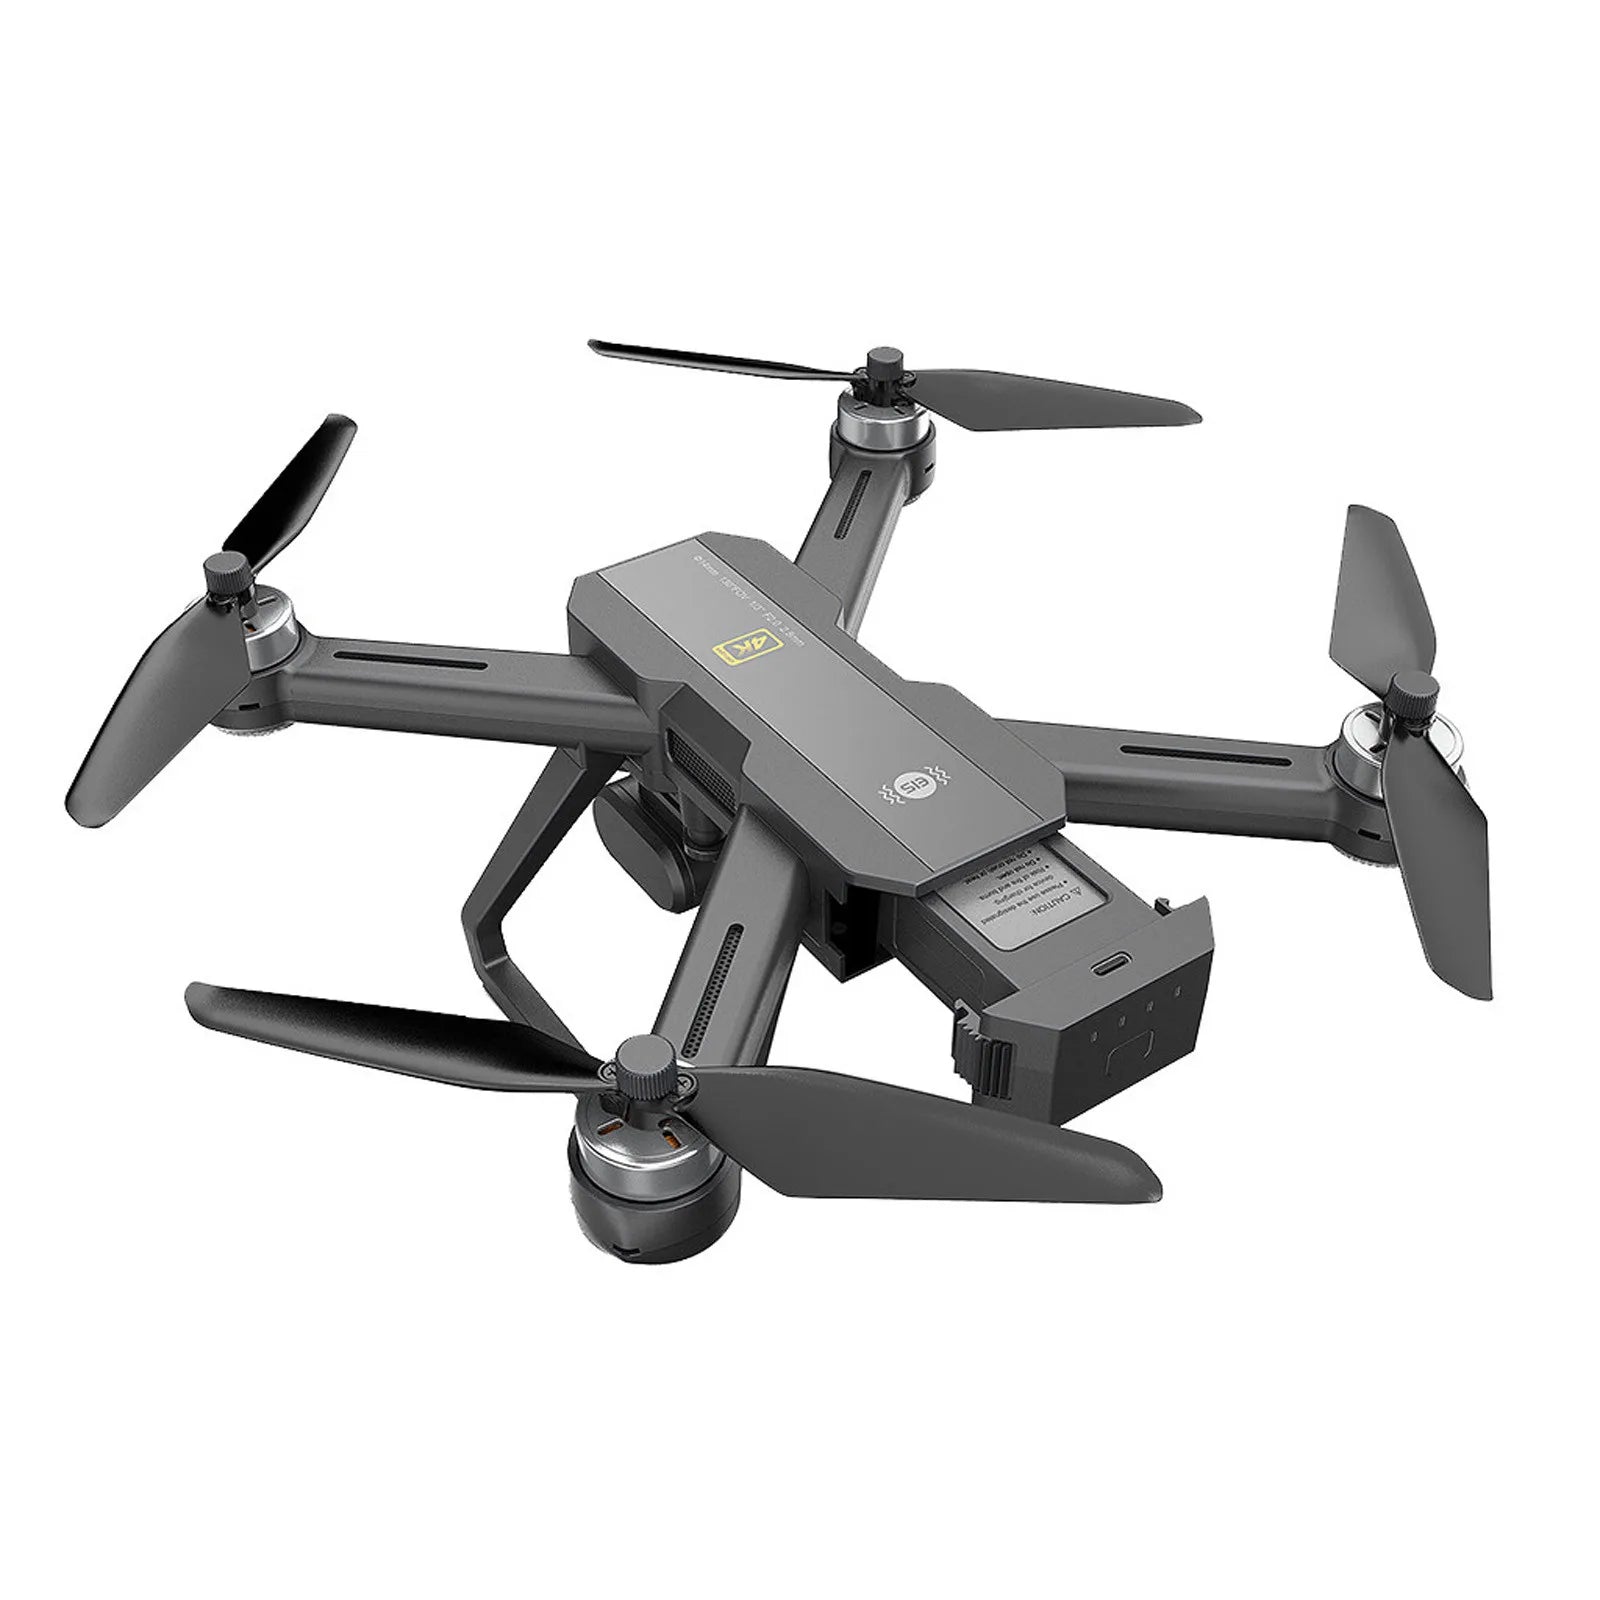 Mjx Bugs 20 Drone, Follow me:The drone's camera will lock on your mobile phone . when using this